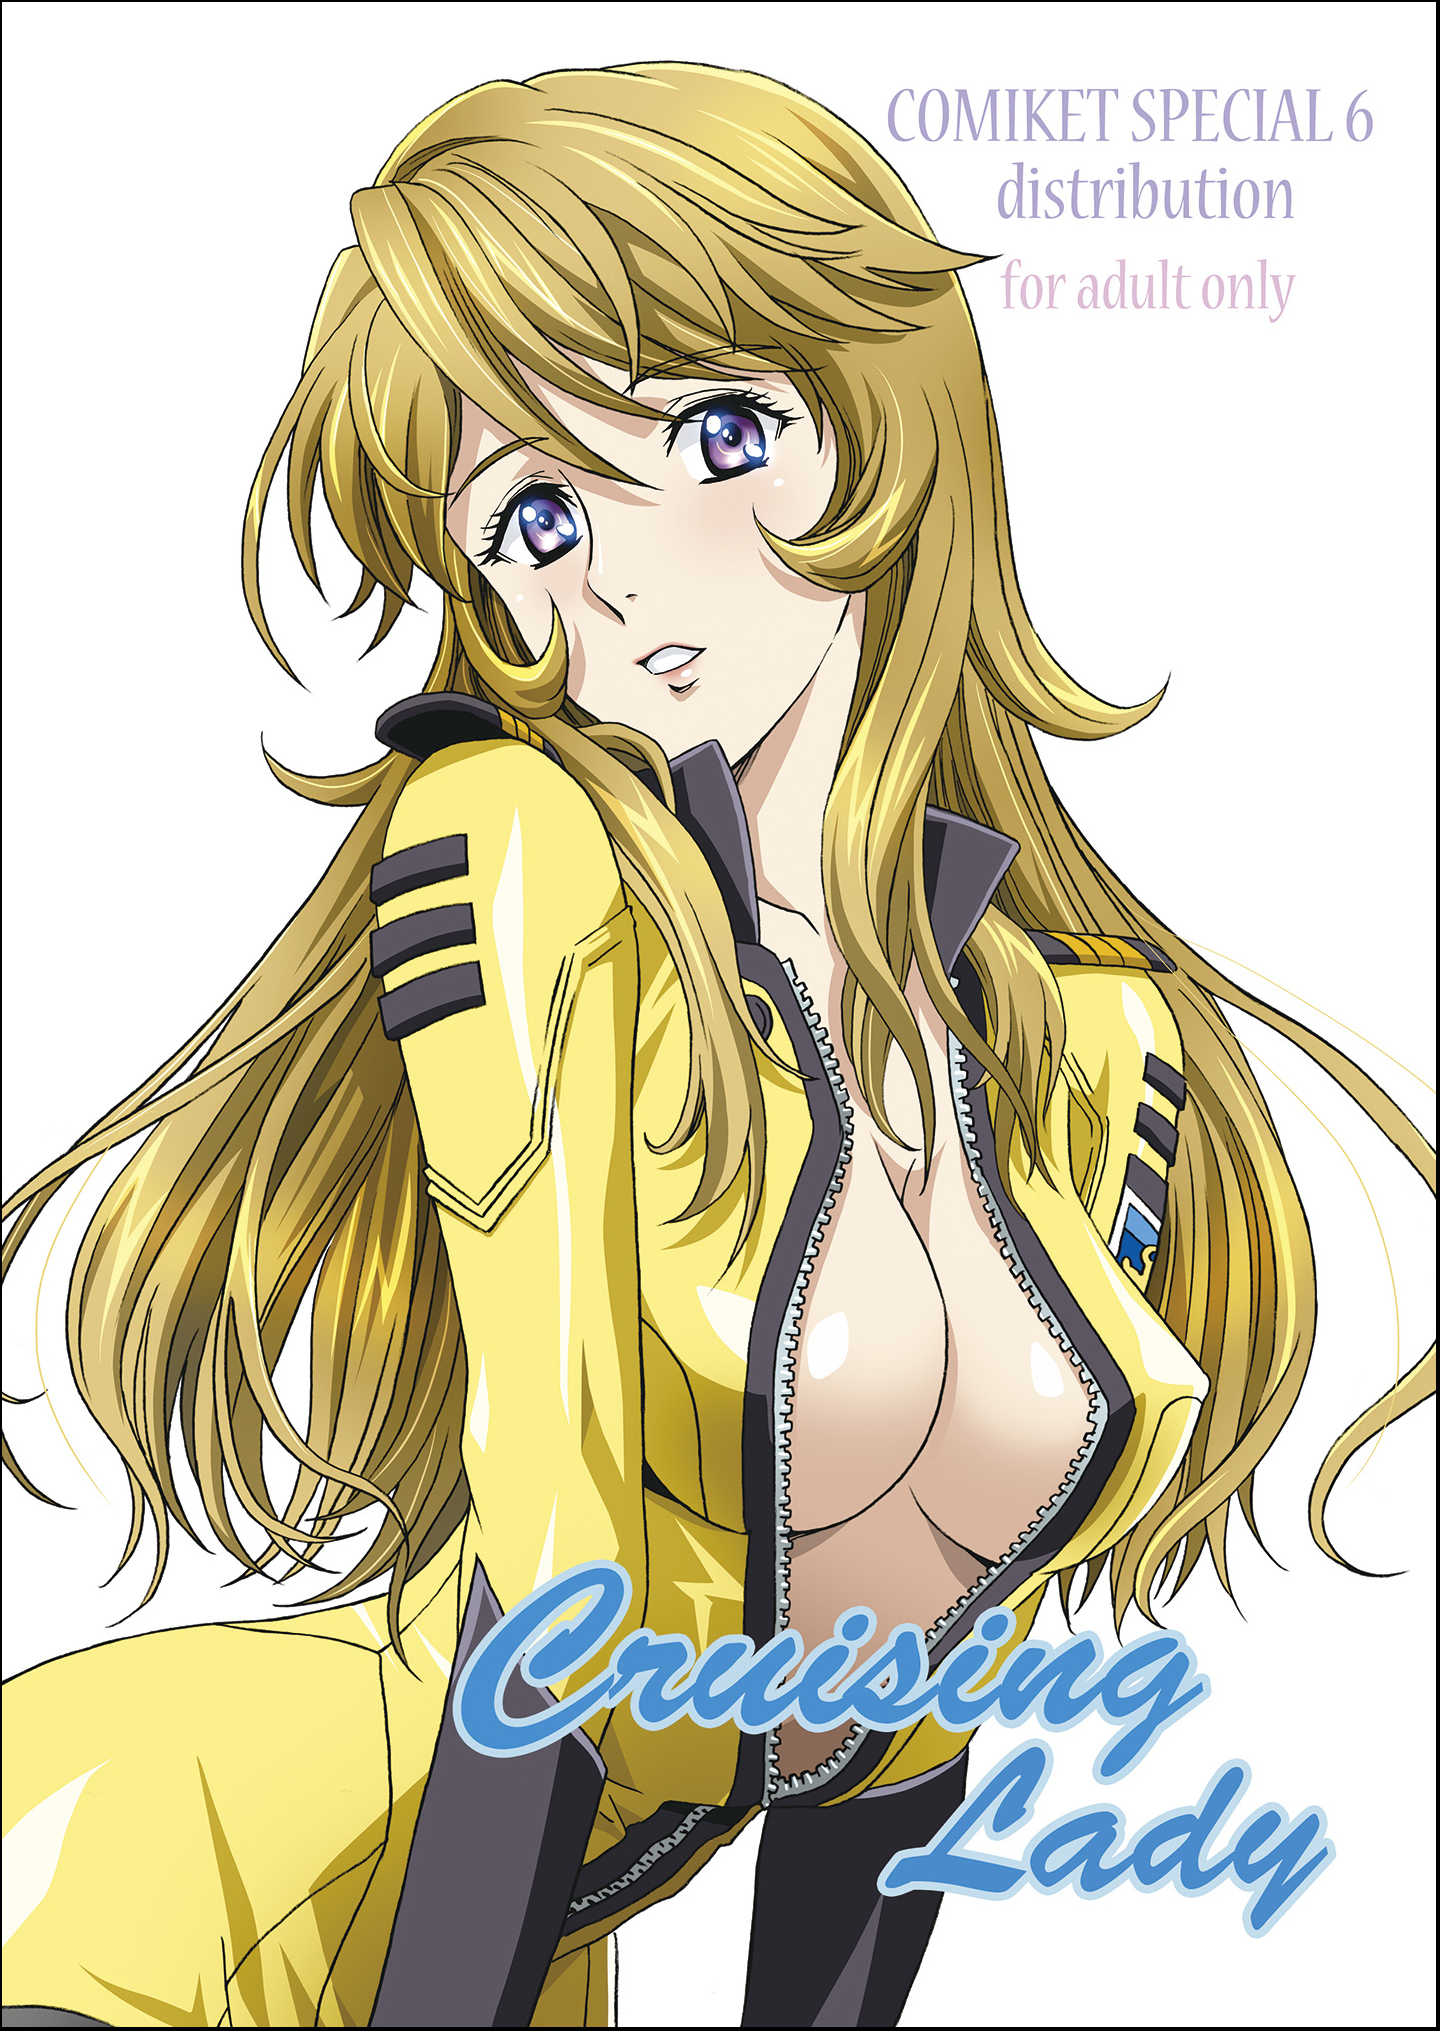 CRUISING LADY COMIKET SPECIAL 6 distribution